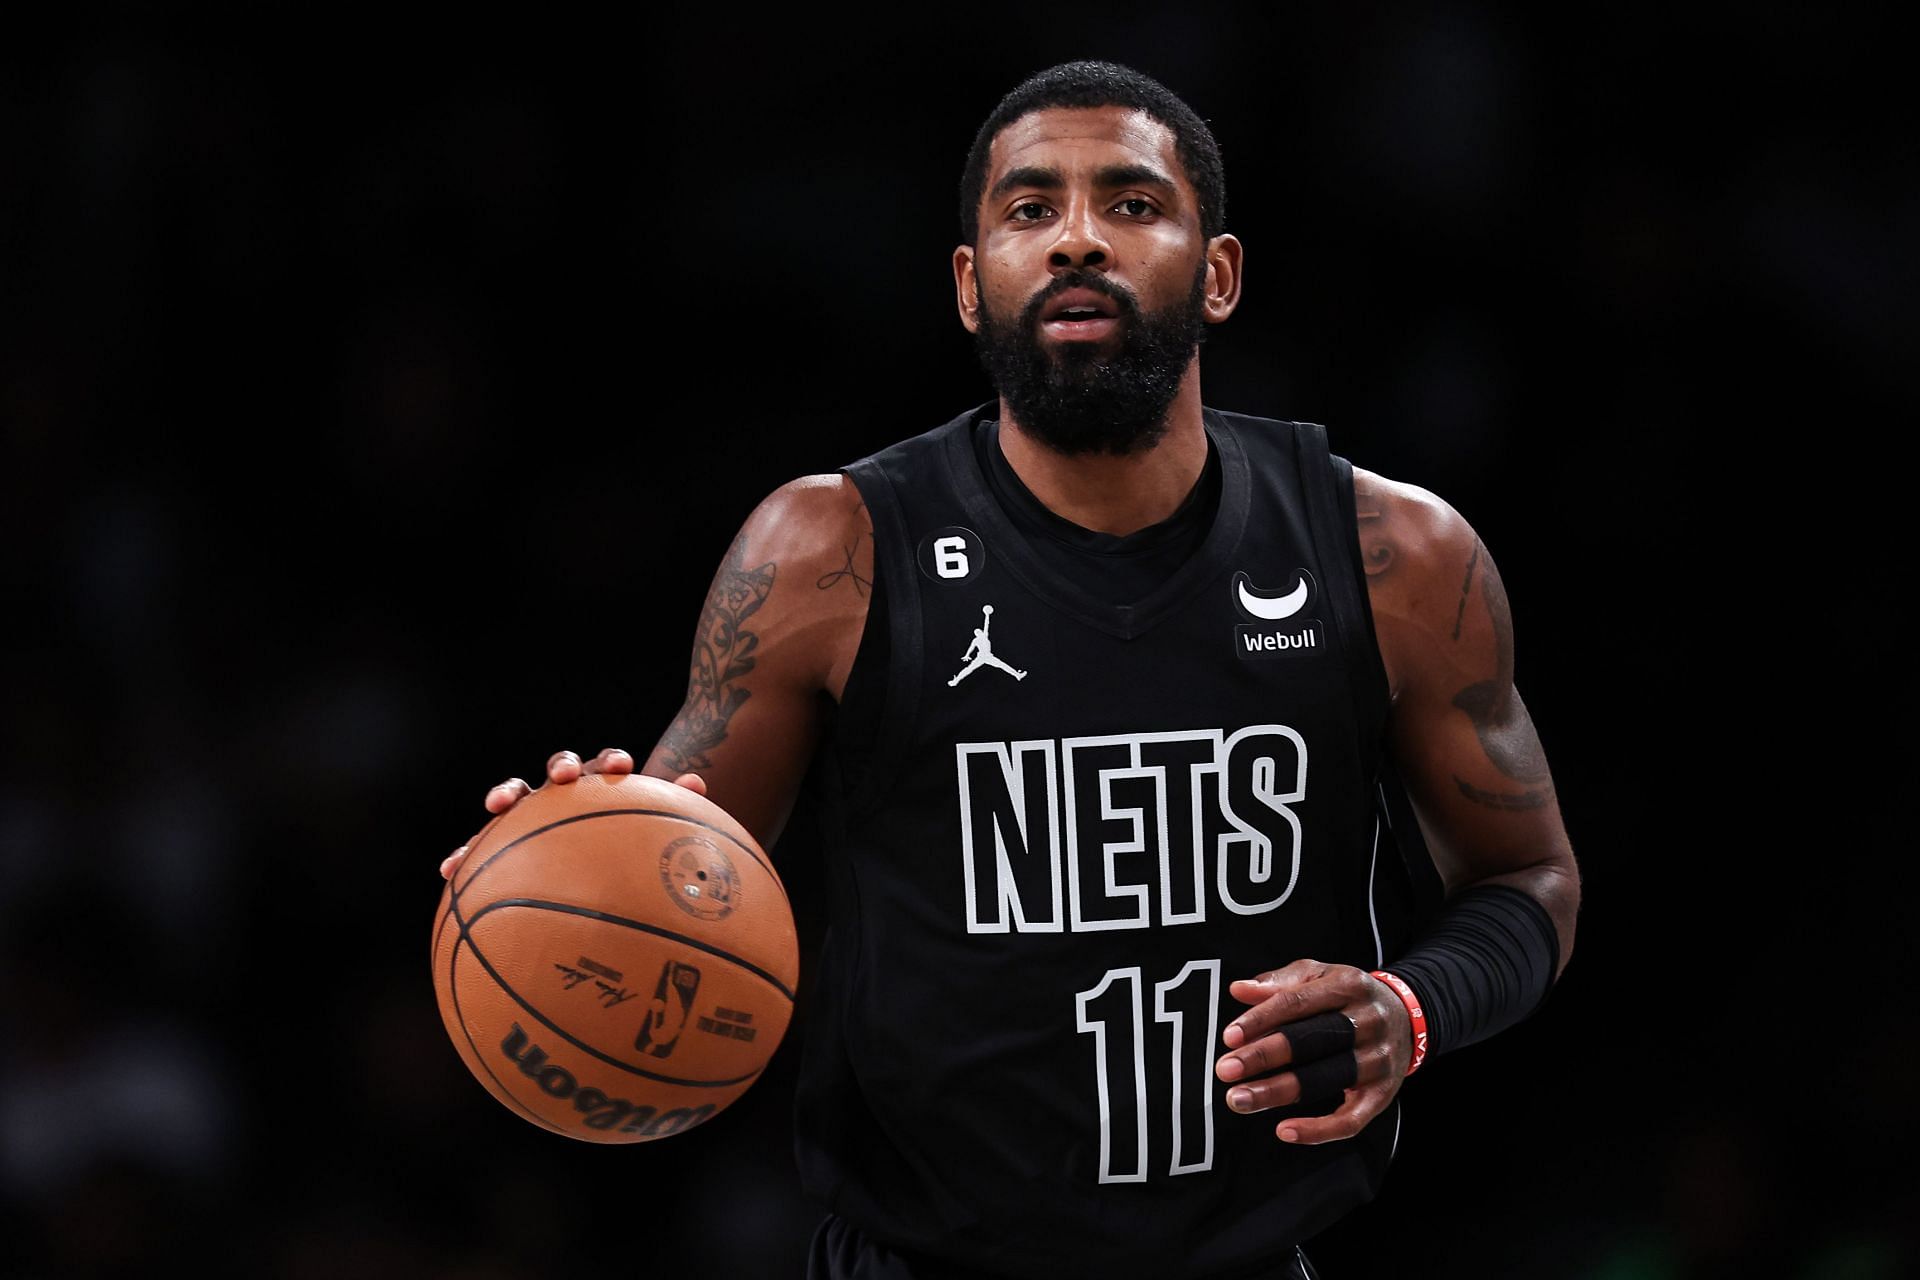 It's official, Kyrie Irving is your NBA Rookie of the Year - NBC Sports